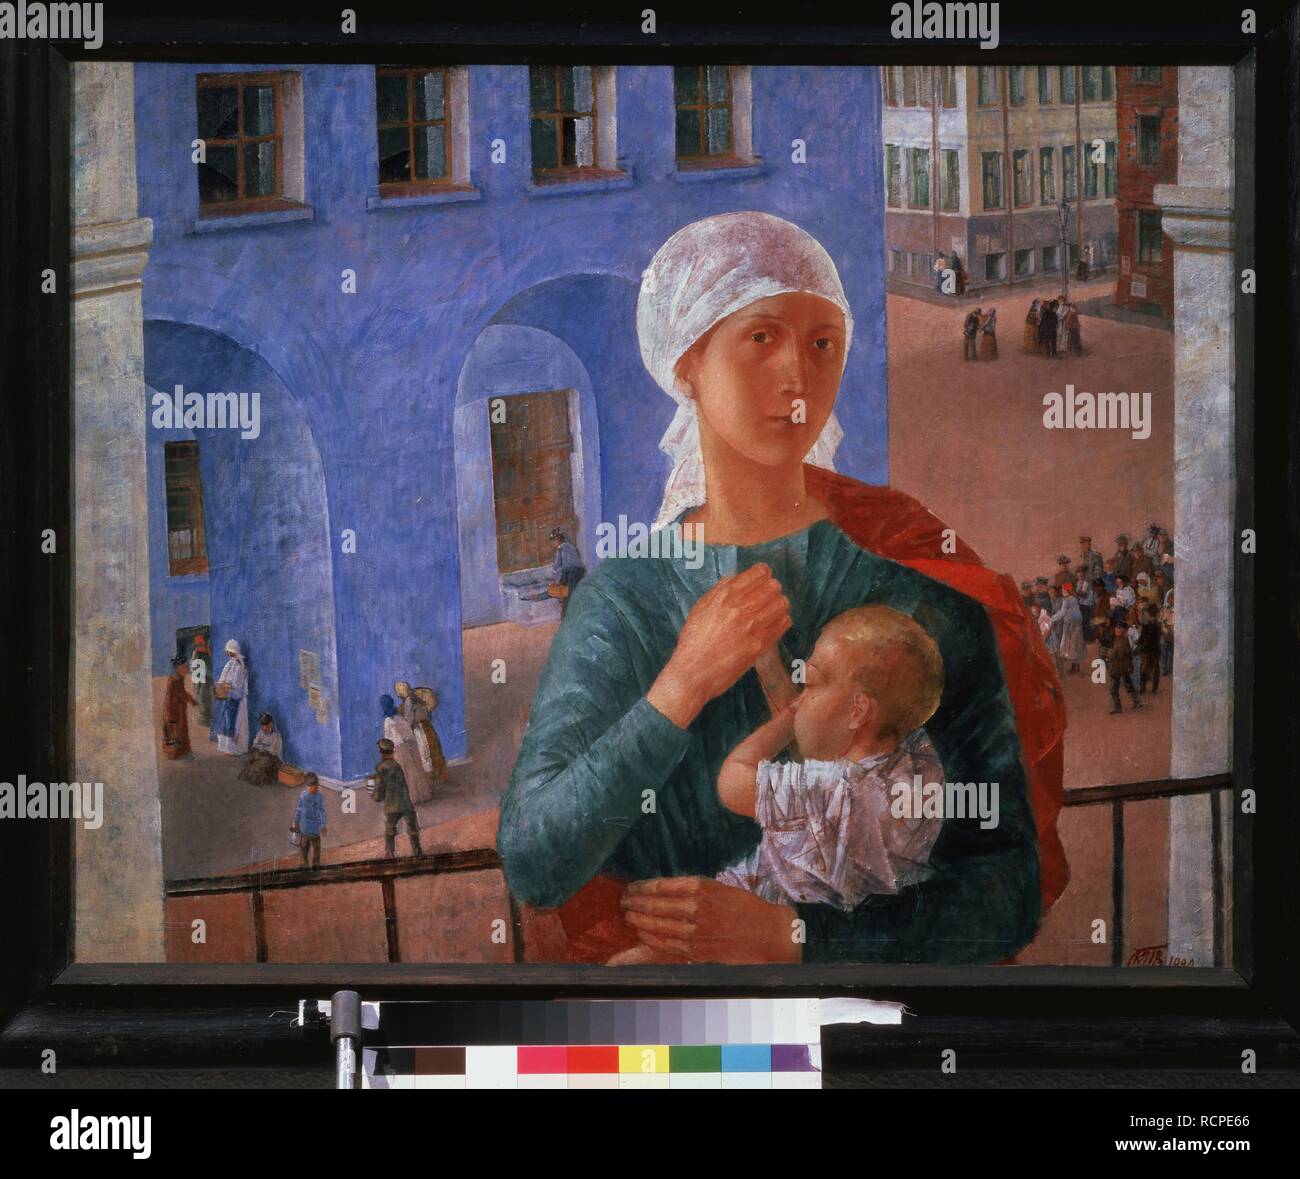 The Year 1918 in Petrograd (Our Lady of Petrograd). Museum: State Tretyakov Gallery, Moscow. Author: PETROV-VODKIN, KUZMA SERGEYEVICH. Stock Photo